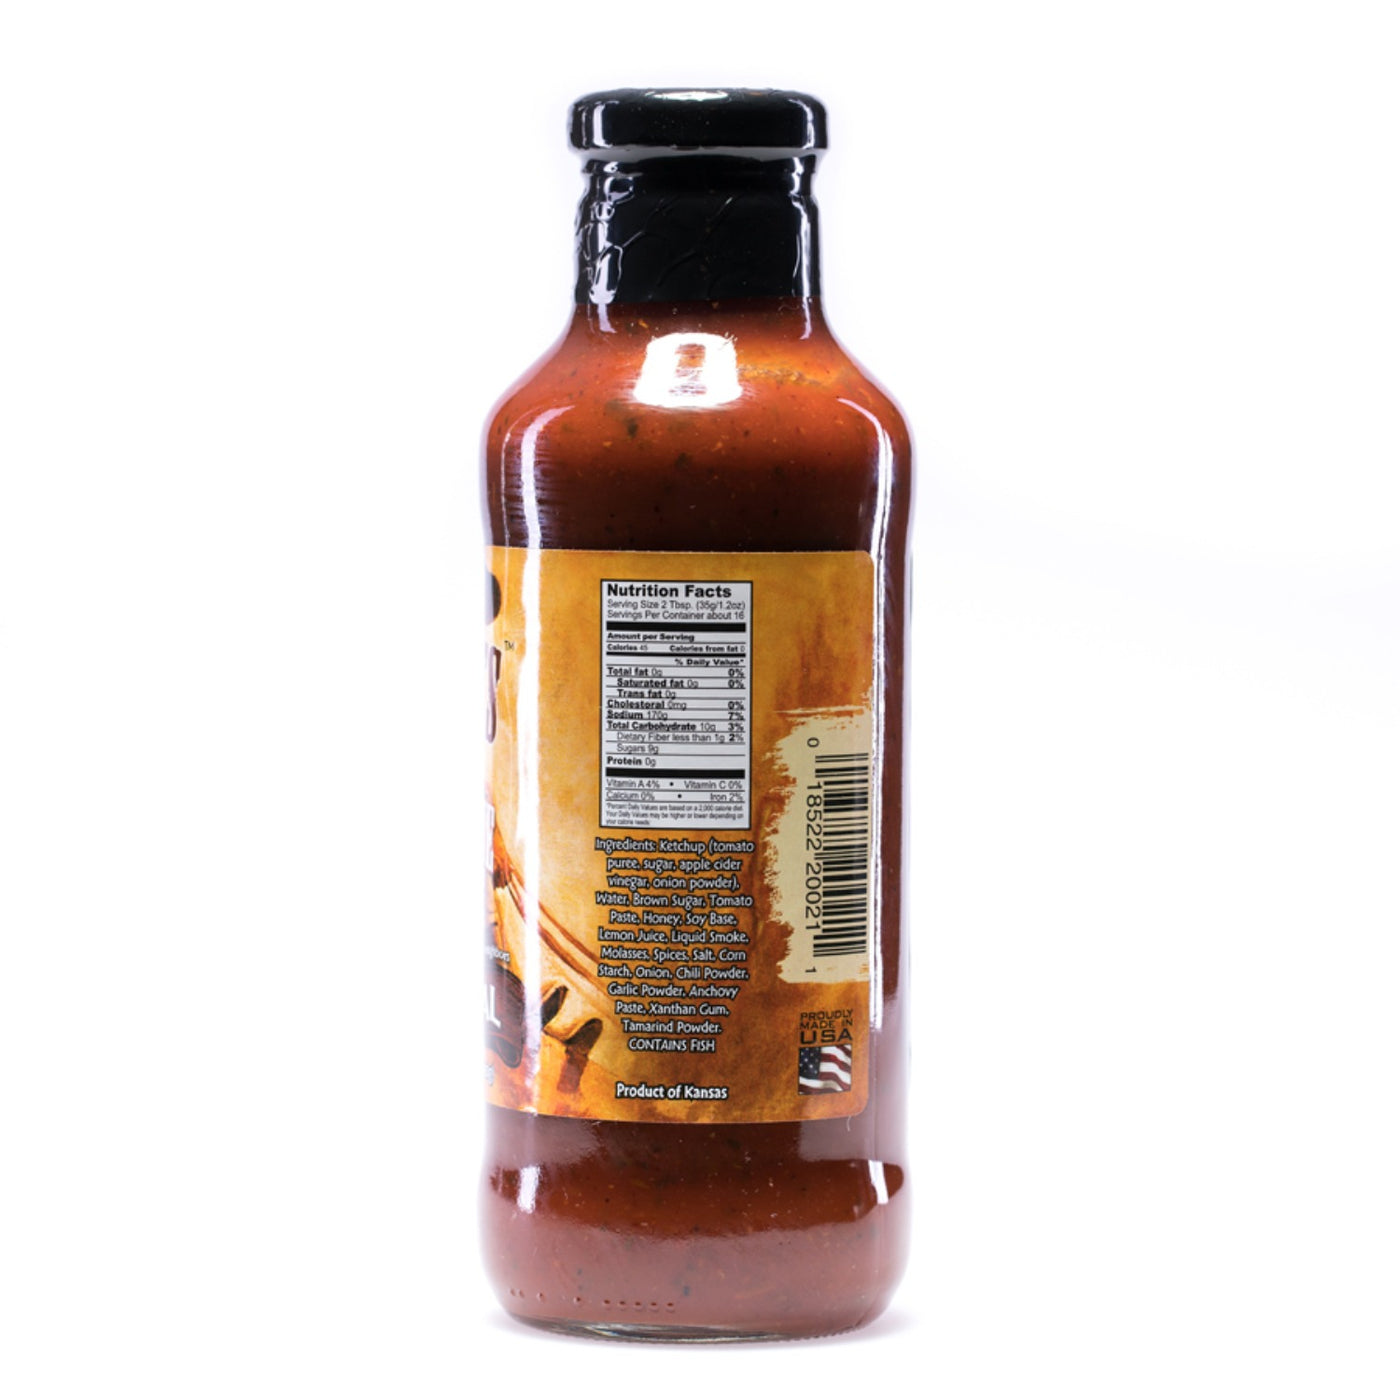 GH - McCoy’s Real Barbecue Sauce - Original